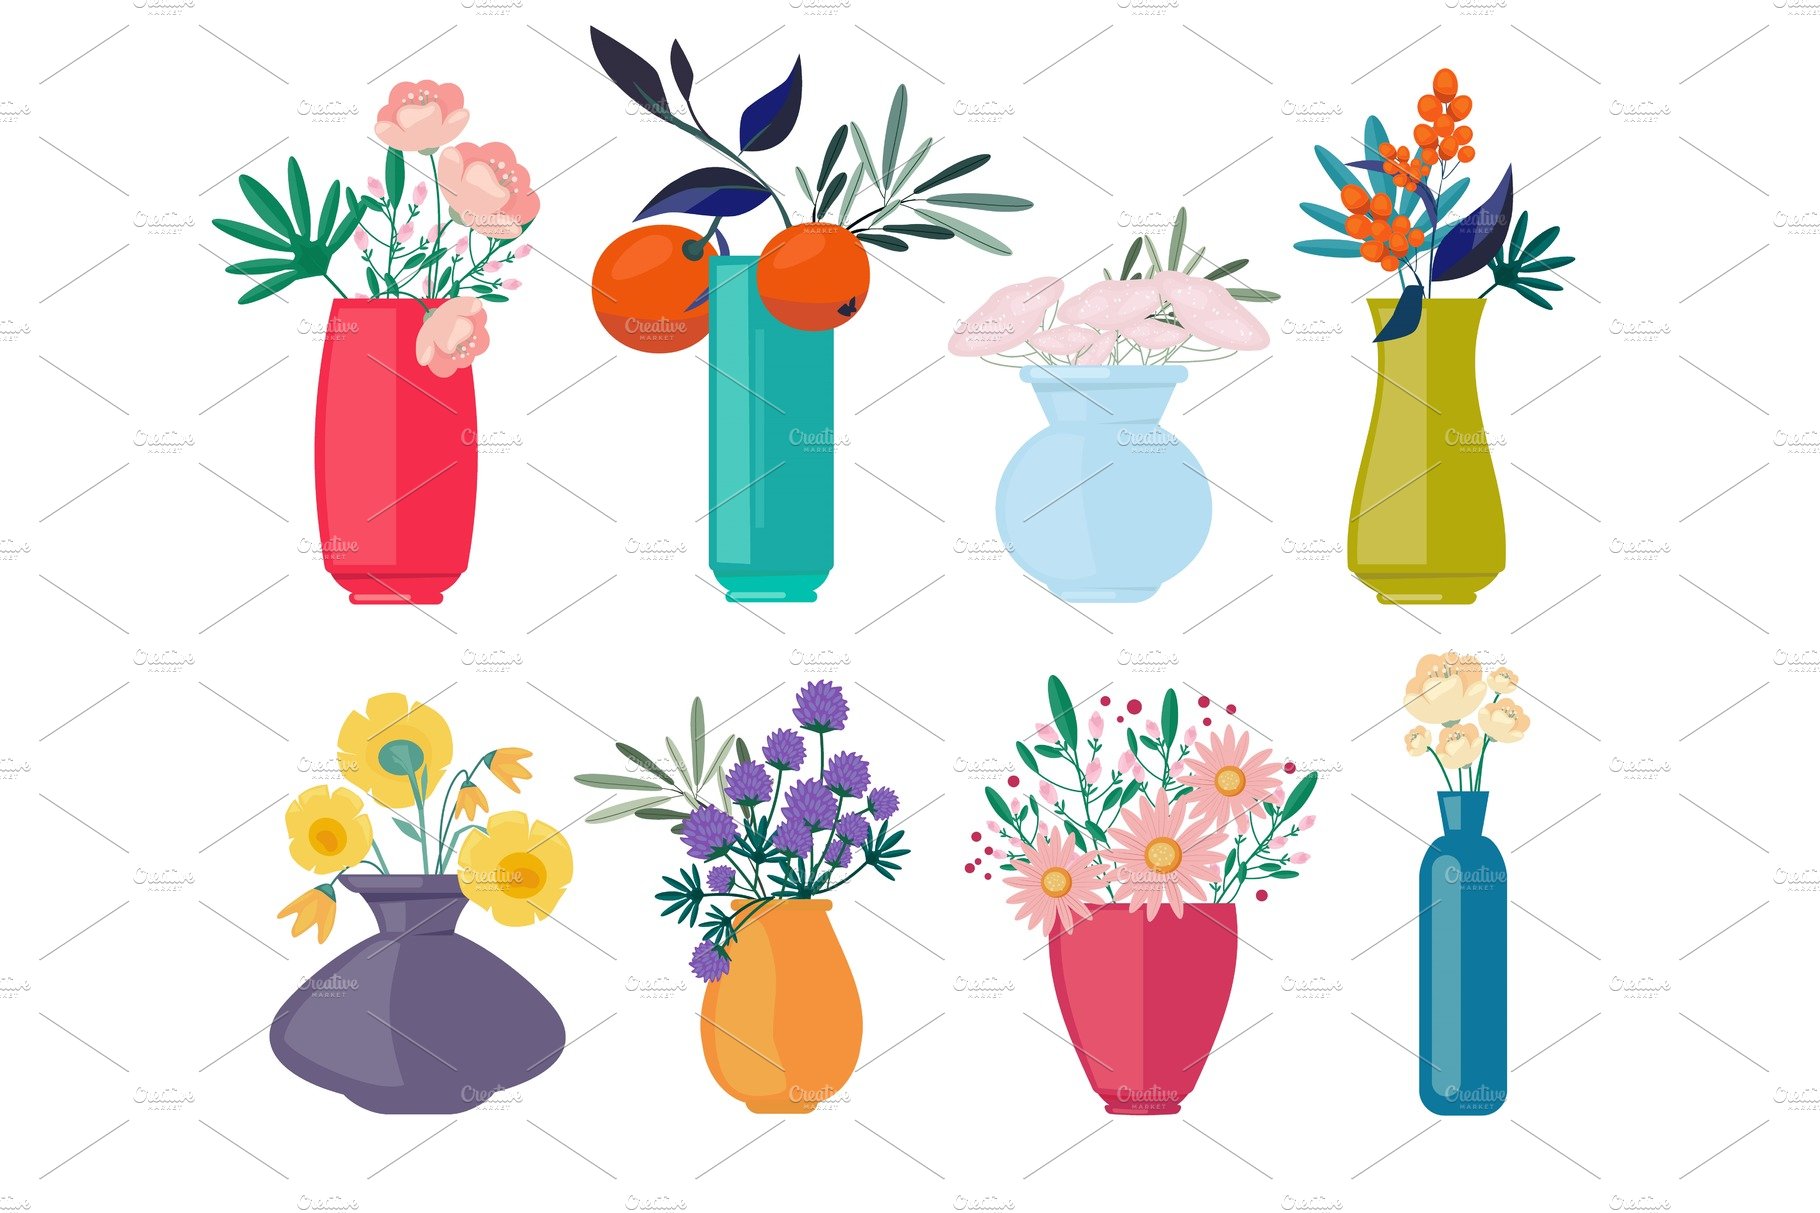 Bouquets vases. Spring or summer cover image.